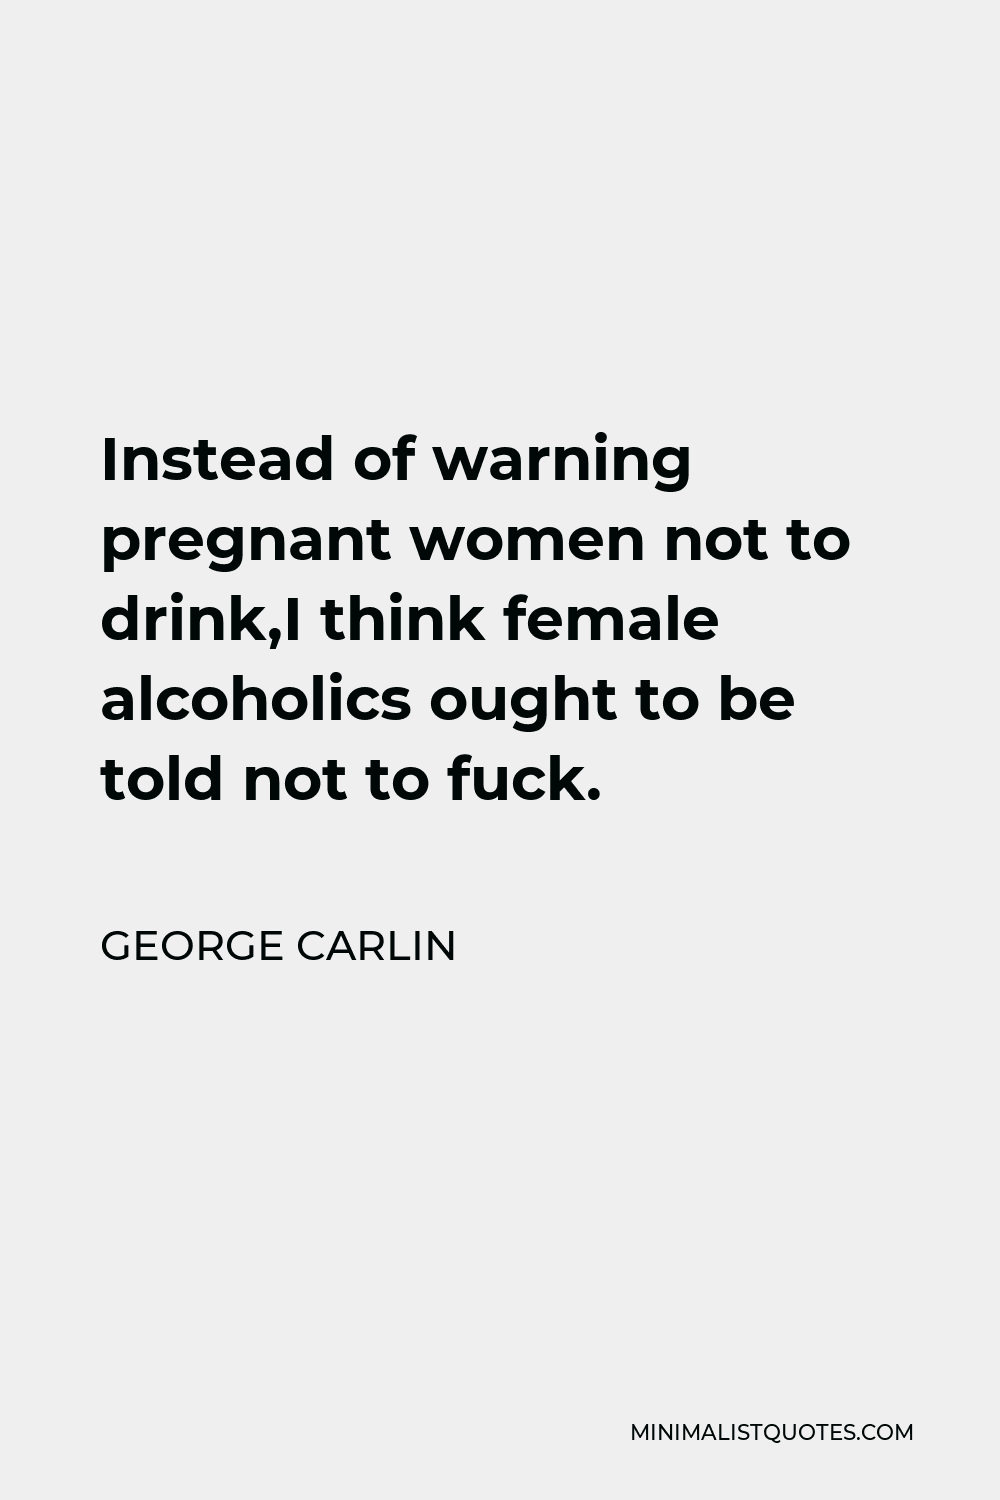 George Carlin Quote - Instead of warning pregnant women not to drink,I think female alcoholics ought to be told not to fuck.